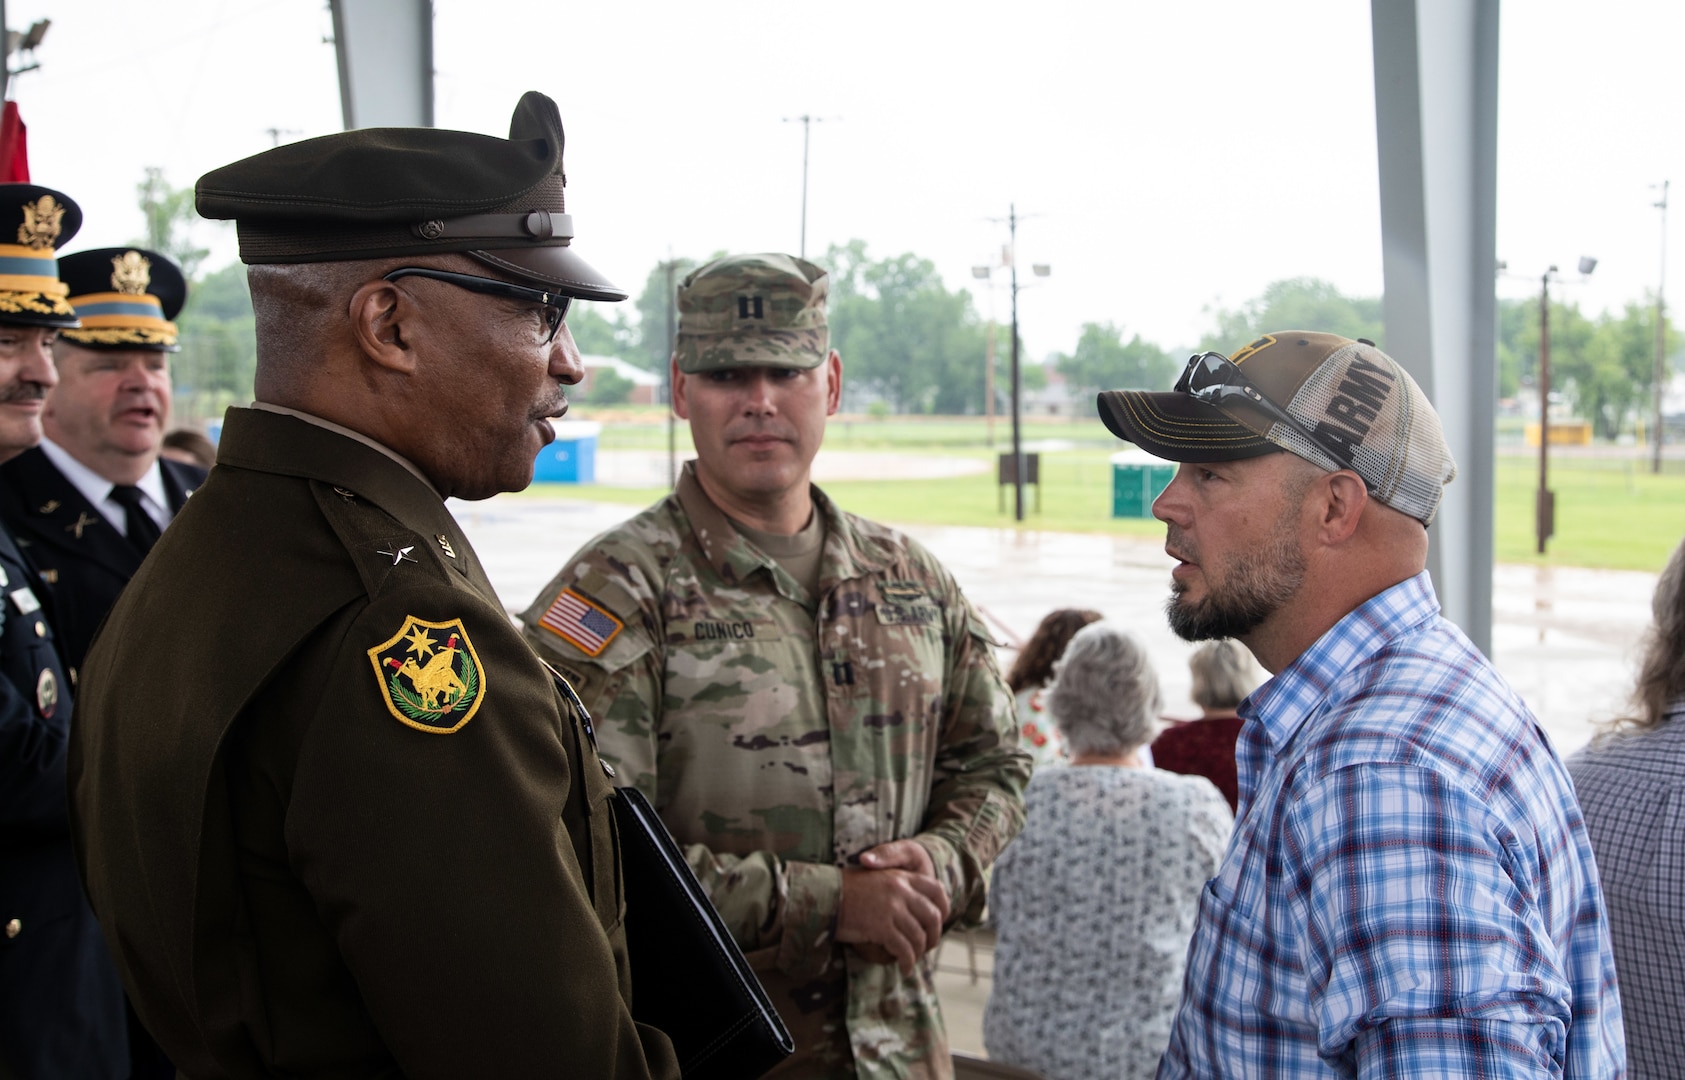 Brig. Gen. Rodney Boyd, of Naperville, Illinois, Assistant Adjutant General – Army and Commander of the Illinois Army National Guard, talks with former Illinois Army National Guard Soldier Randall Romines, brother of Sgt. Brian Romines, following the Sgt. Brian Romines Memorial Highway dedication ceremony, June 6, in Anna, Illinois.